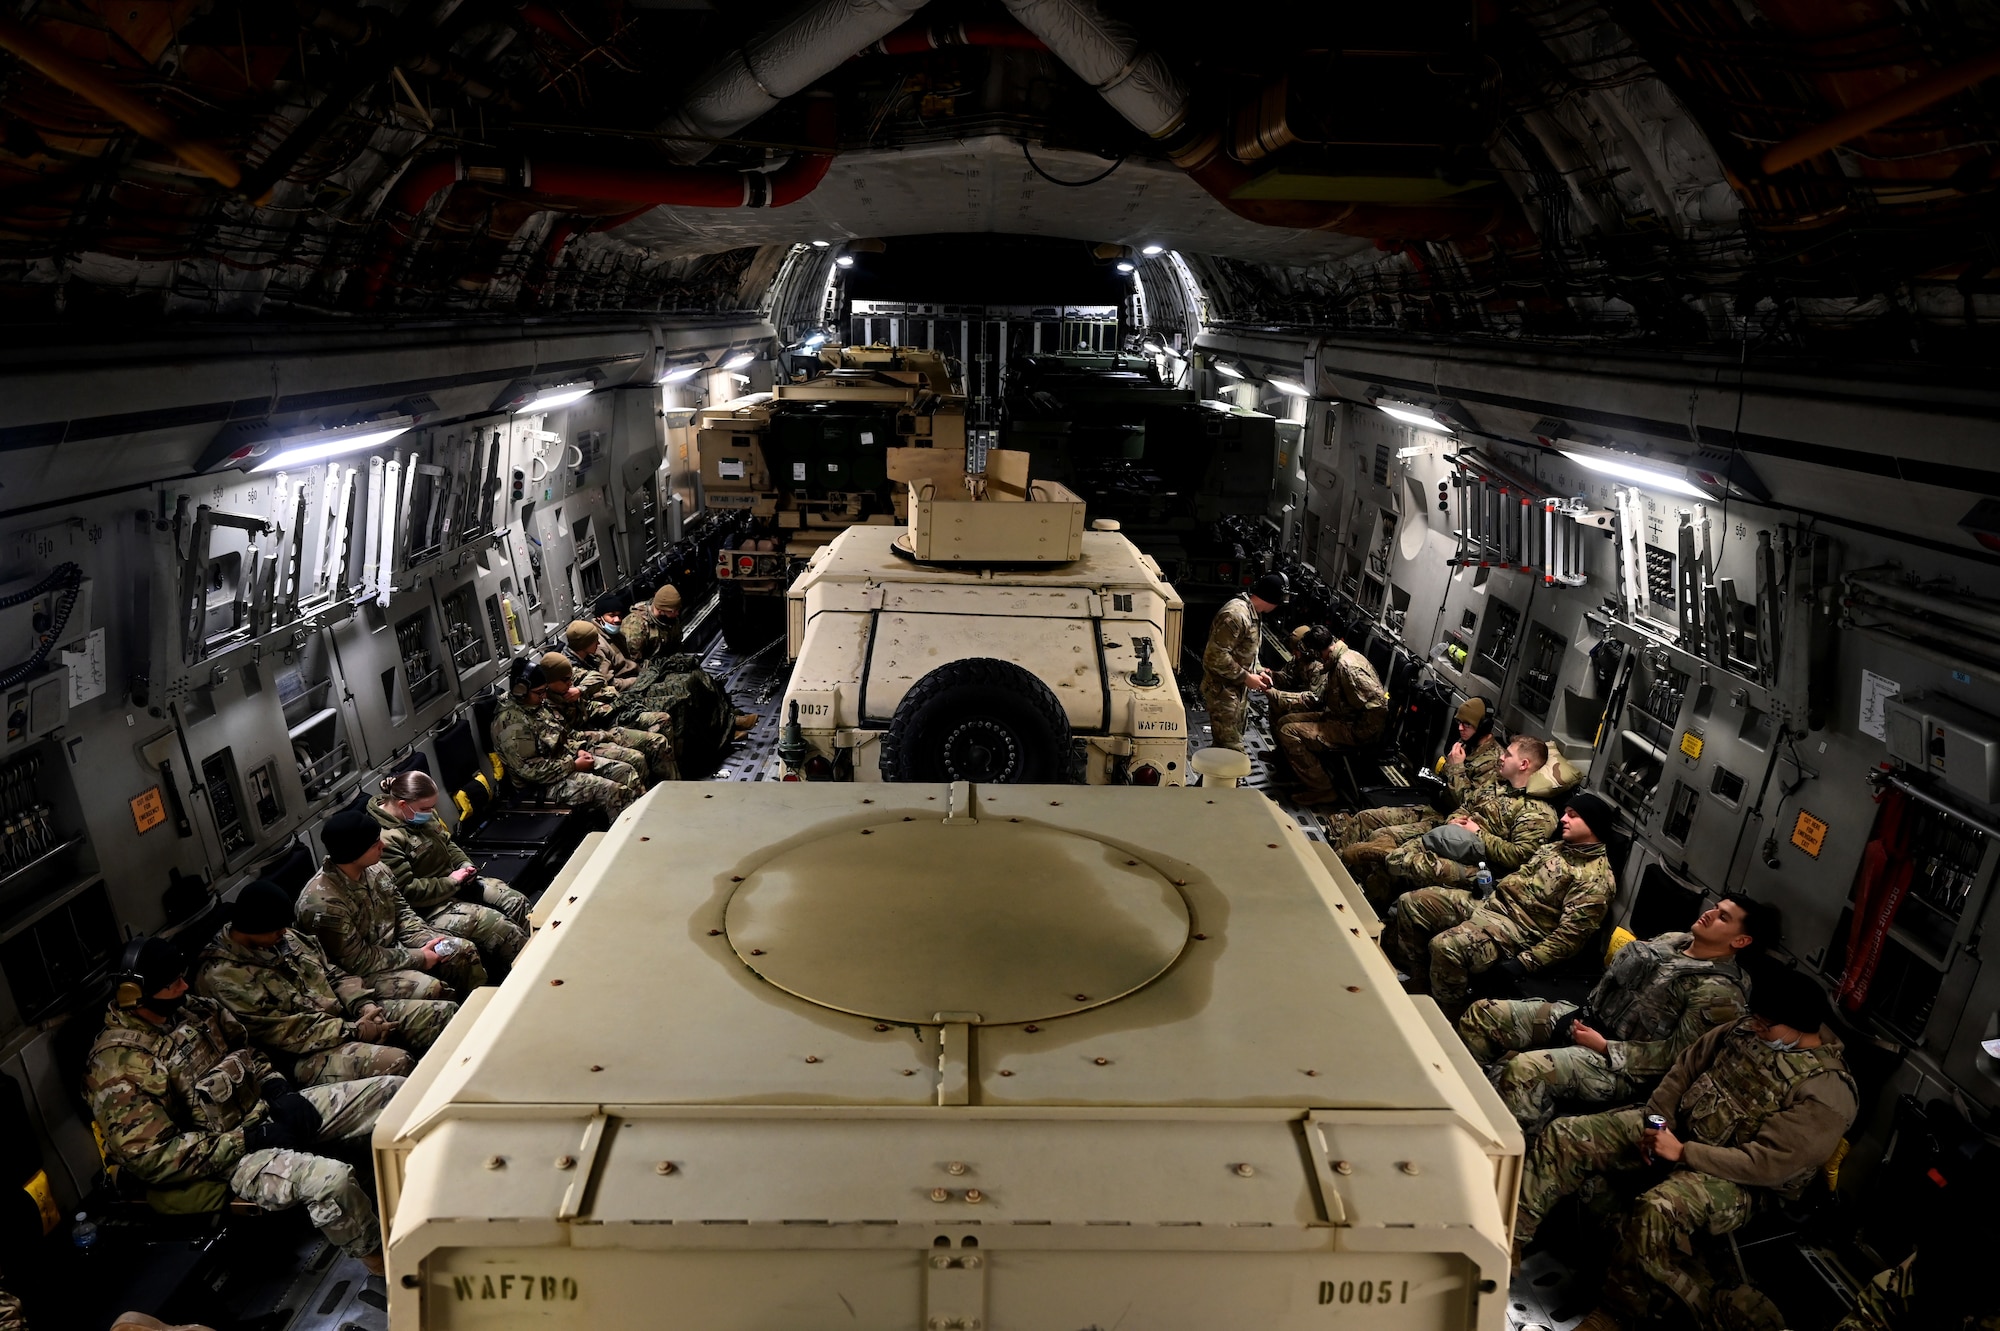 U.S. Army Soldiers with Bravo Battery, 194th Field Artillery Regiment, 17th Field Artillery Brigade prepare for take off on a C-17 Globemaster III during Exercise Rainier War 21B at Joint Base Lewis-McChord, Washington, Nov. 6, 2021. The exercise is designed to demonstrate the wing’s ability to operate and survive while defeating challenges to the U.S. military advantage in all operating domains – air, land, sea and cyberspace. (U.S. Air Force photo by Master Sgt. Julius Delos Reyes)